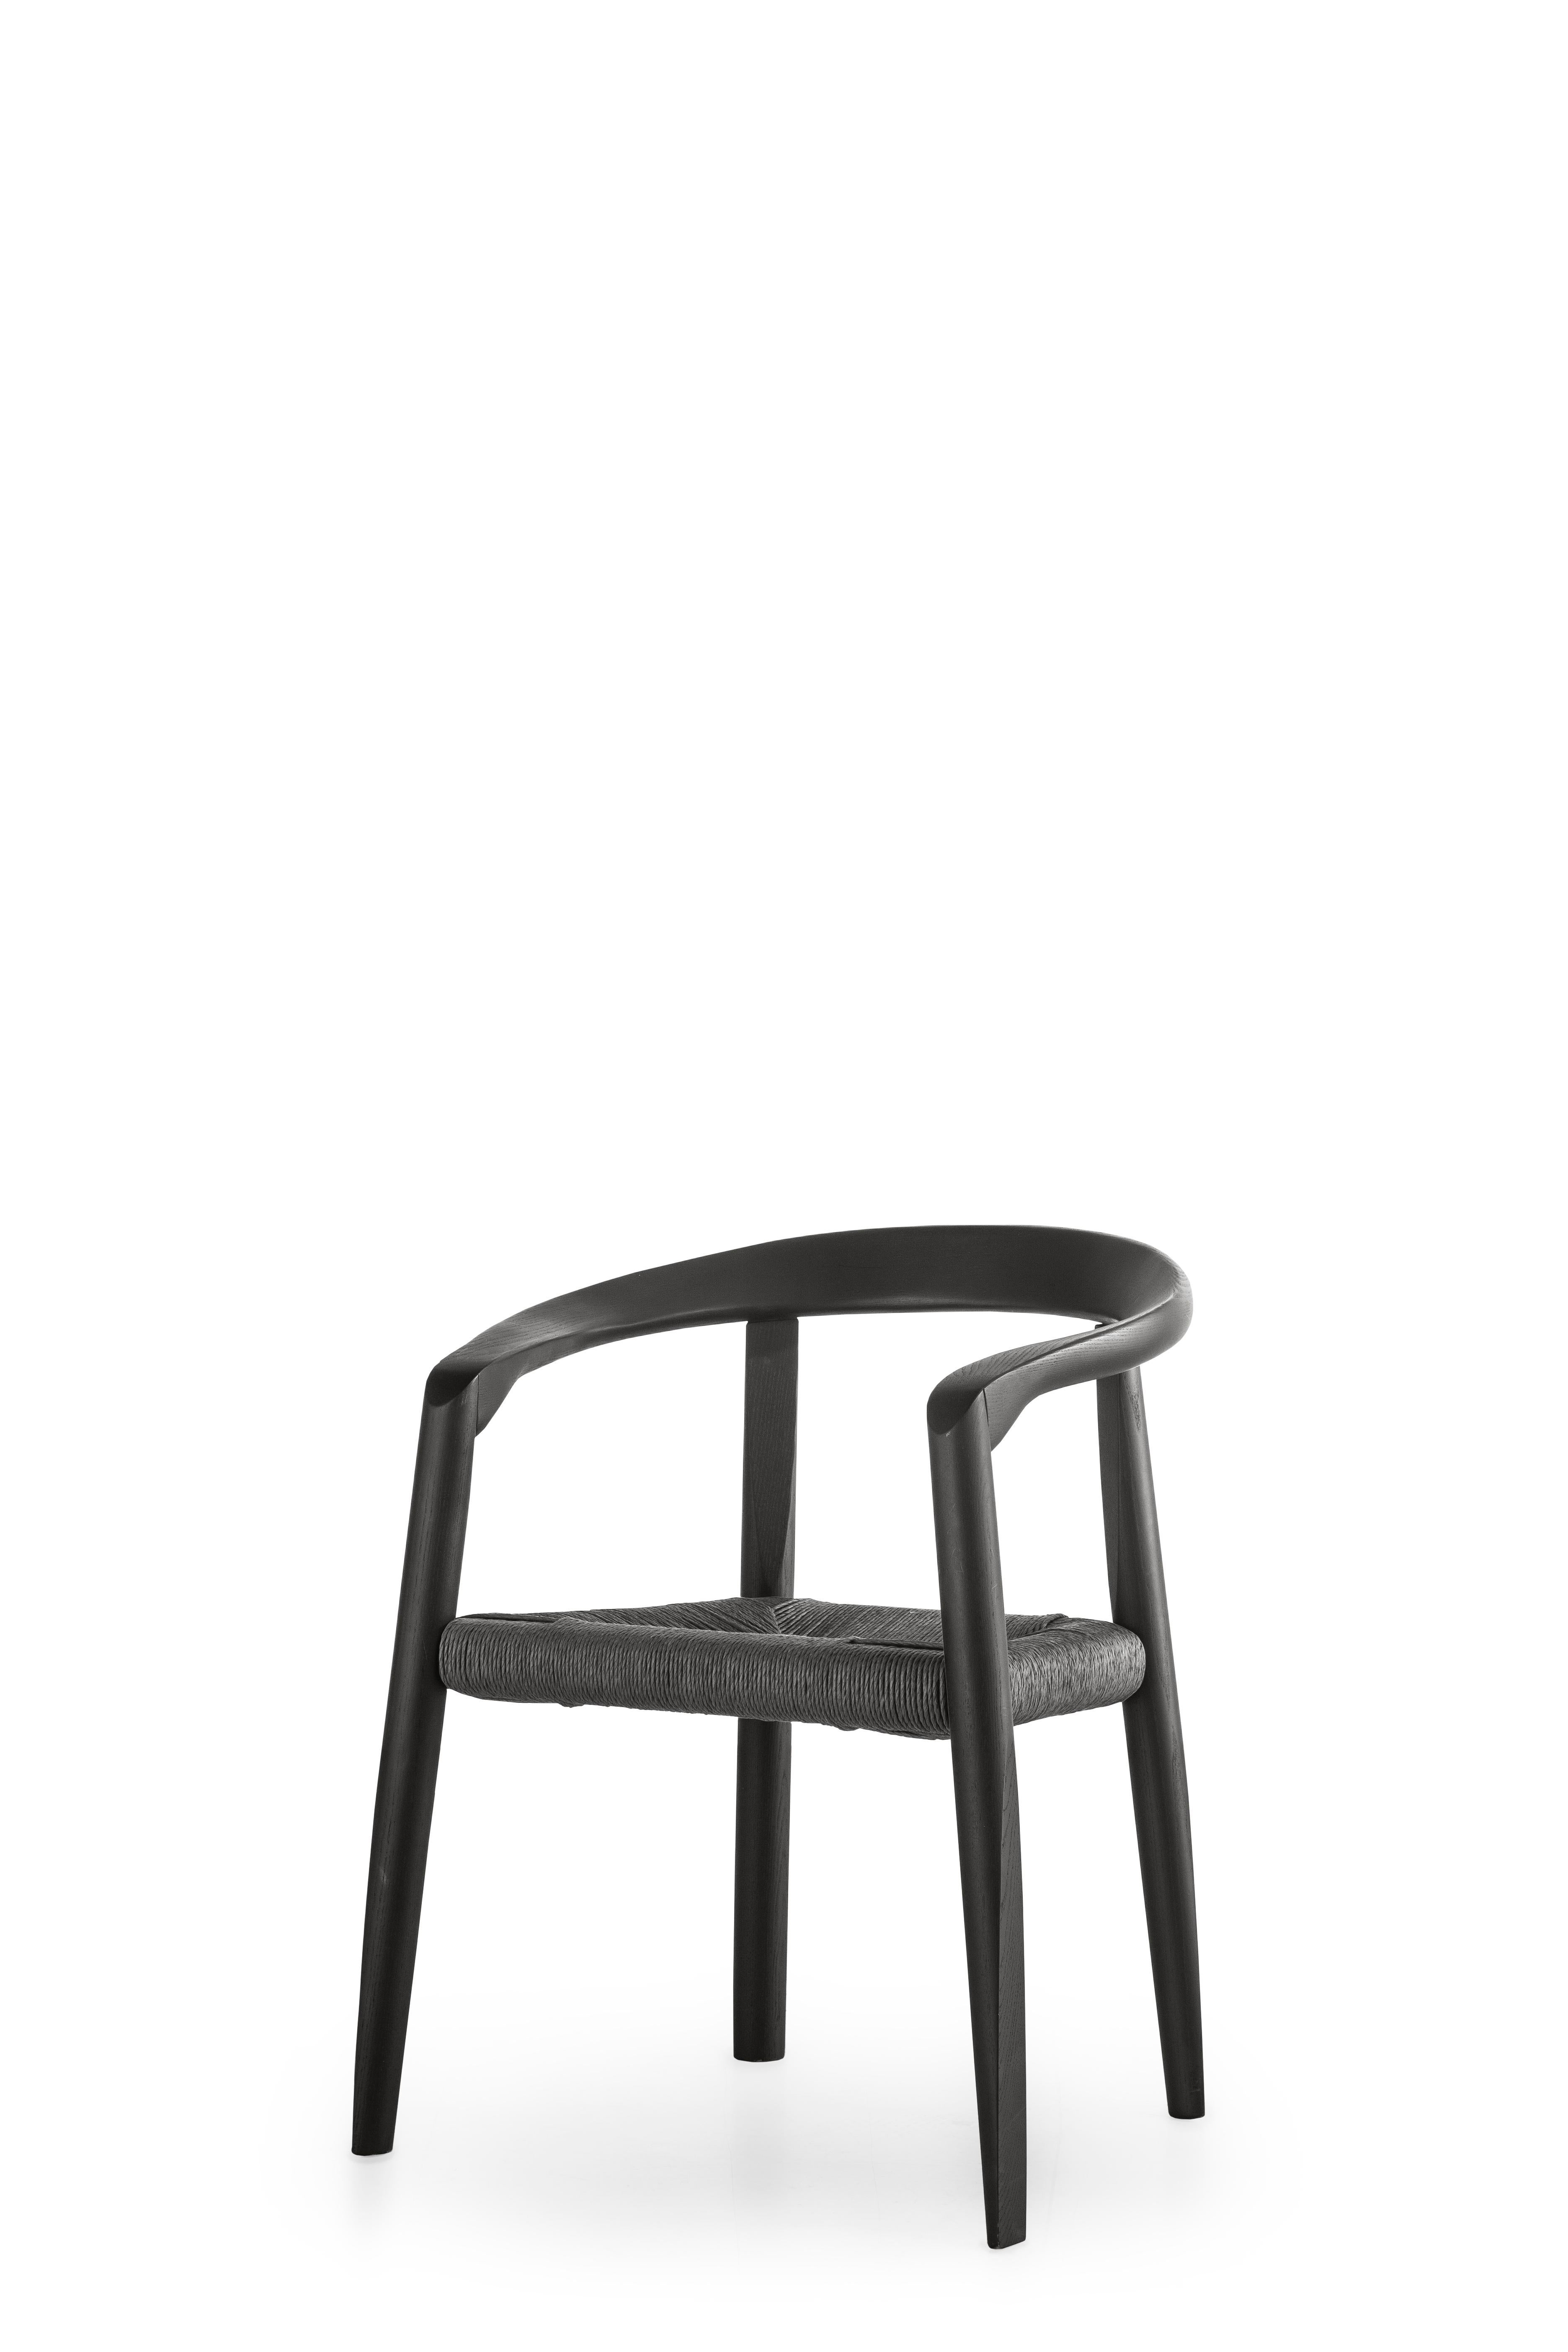 For Sale: Gray (GR_grey) Woven Black Ash Wood Dining Chair Molteni&C by Tobia Scarpa - made in Italy 2